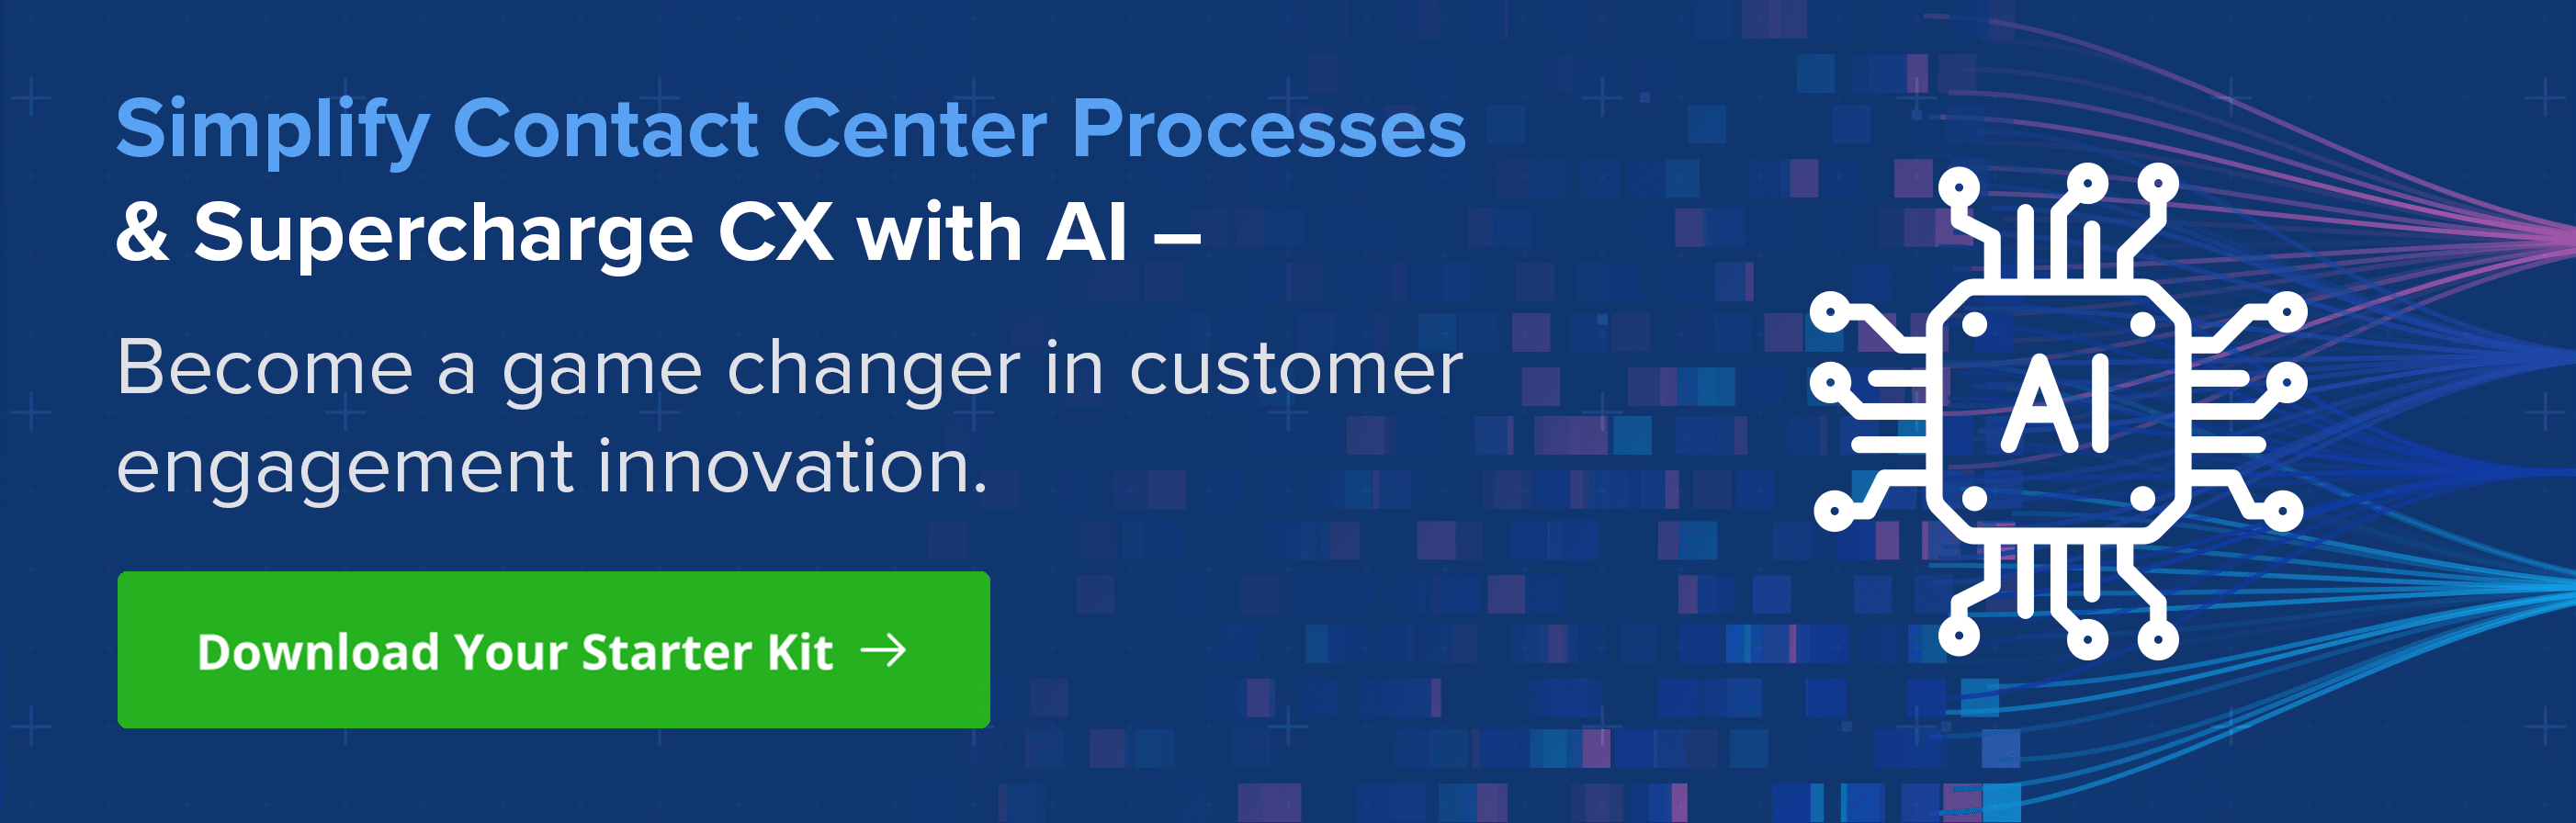 CommBox launches Era AI to enable customer service to be intelligently  automated and CX costs to be cut by 40%